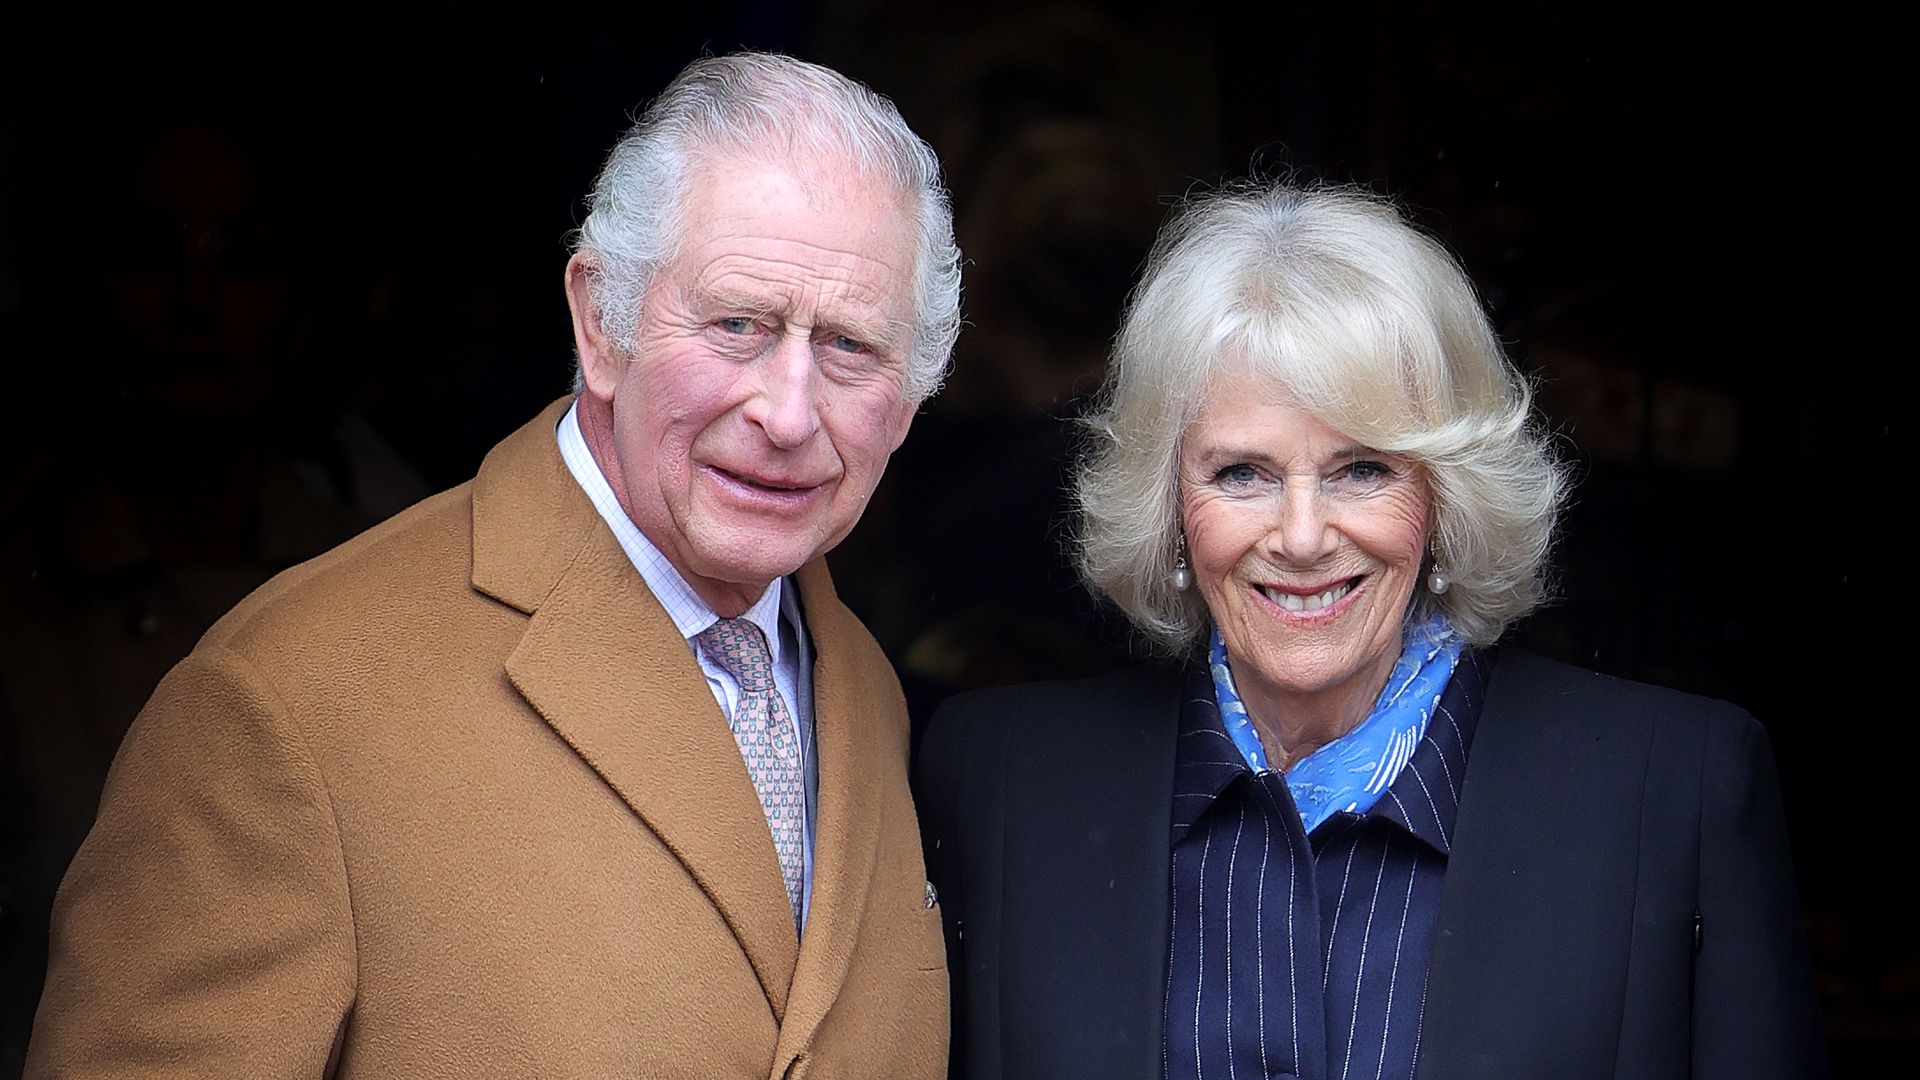 Charles and Camilla's biggest milestones together